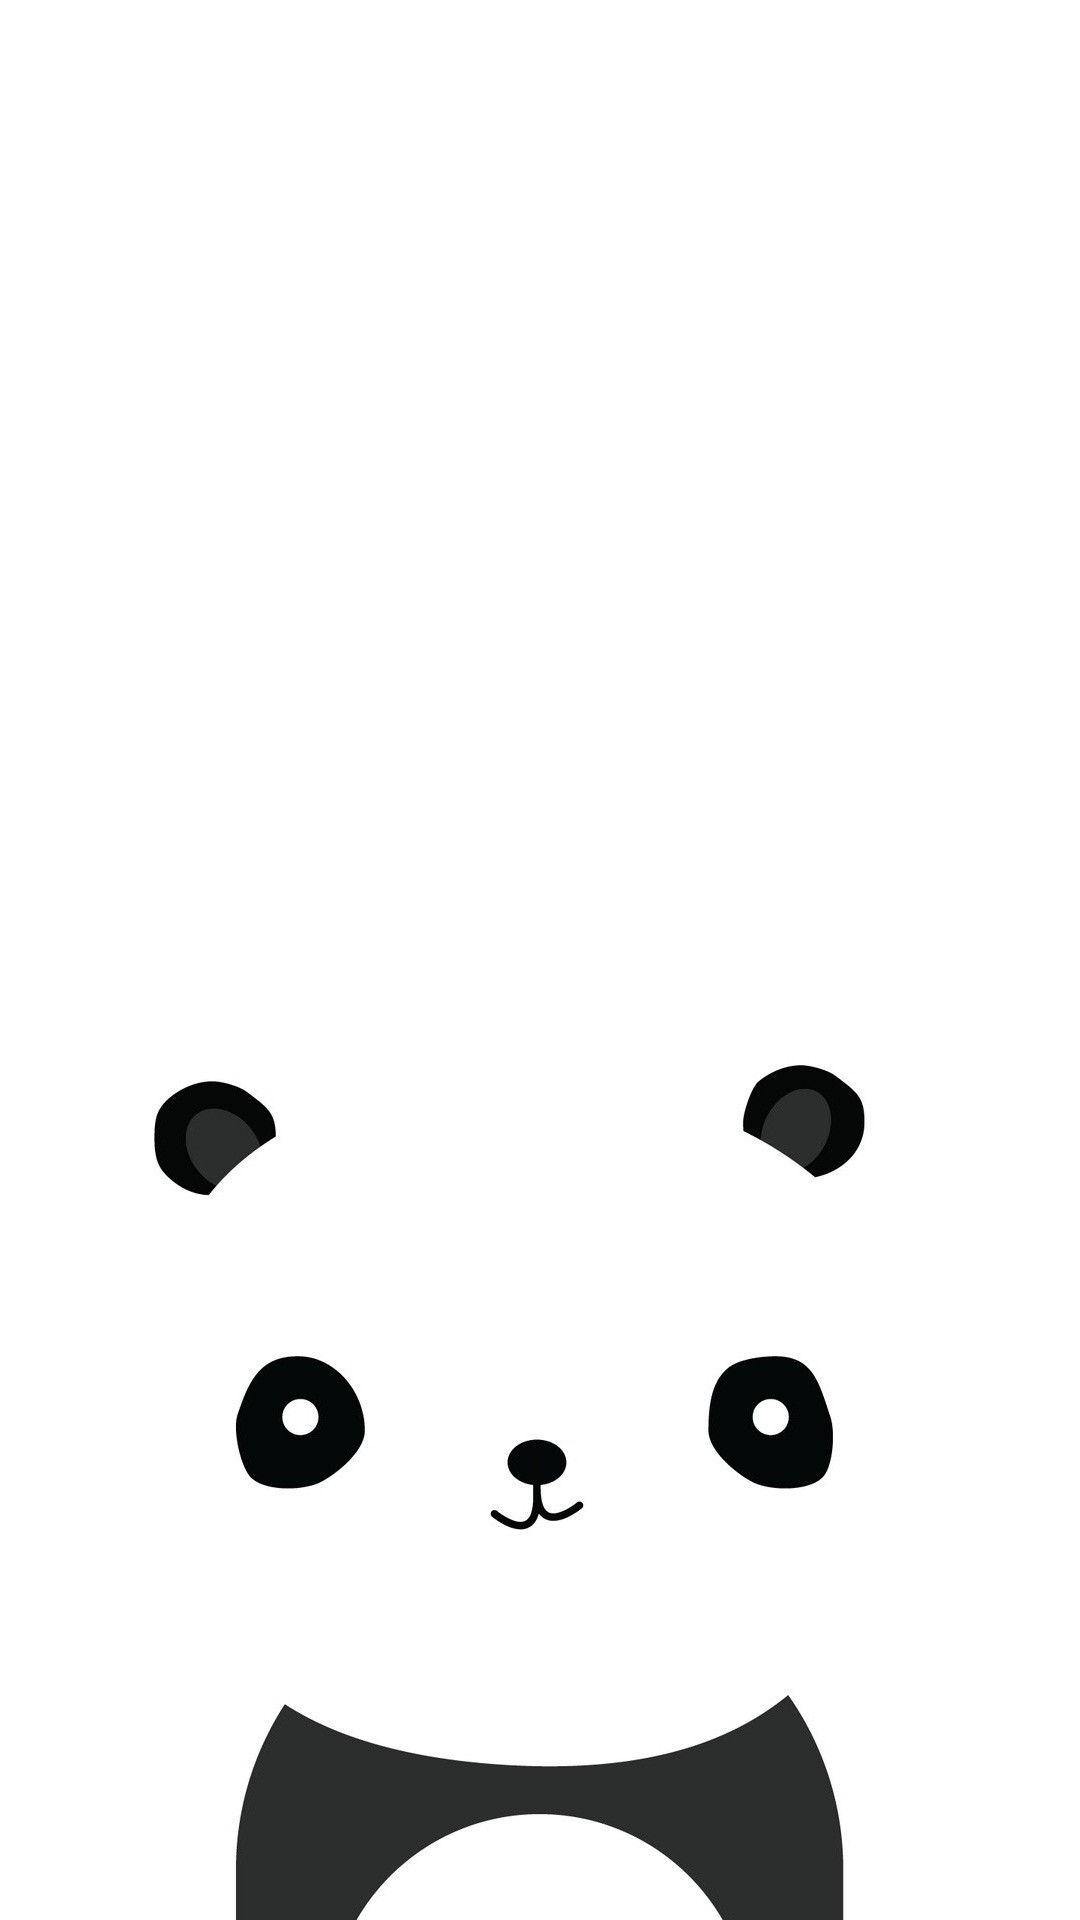 Panda Cute Android Wallpaper with HD resolution 1080x1920